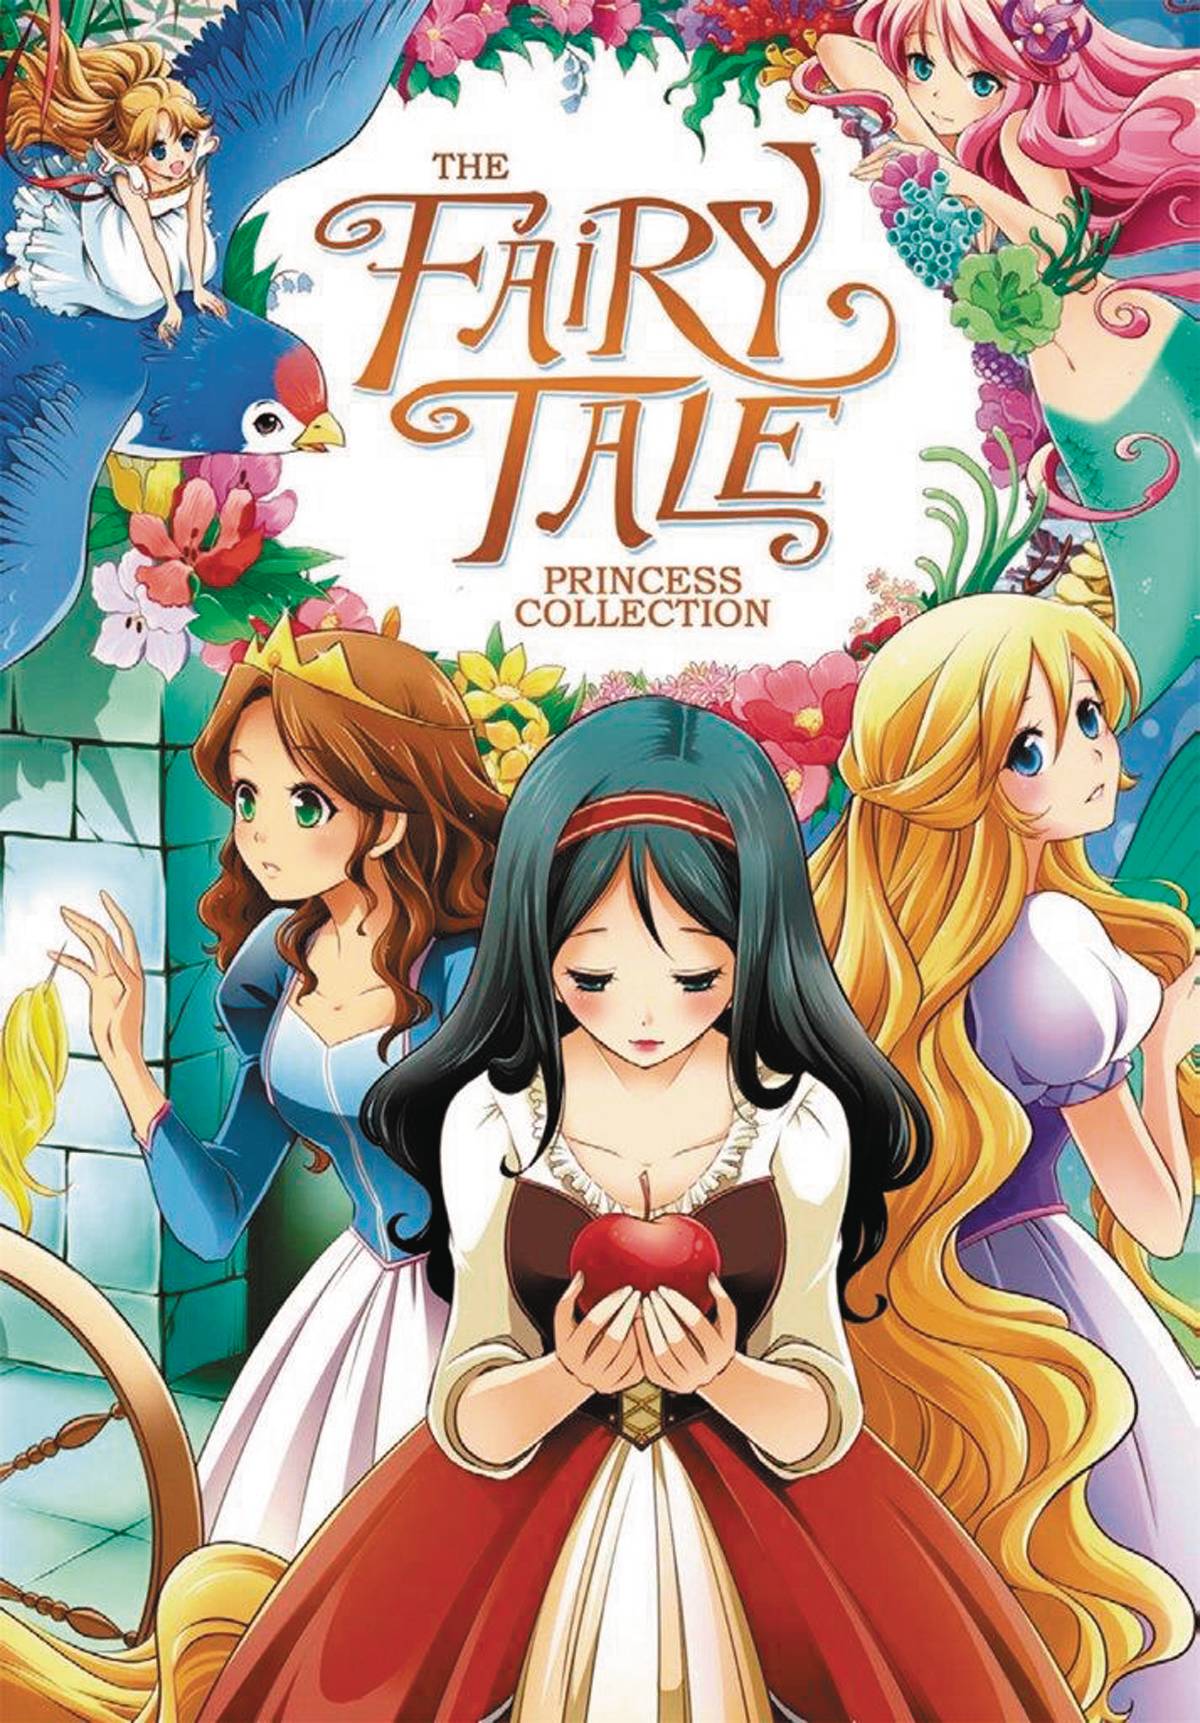 Illustrated Fairytale Princess Collected Graphic Novel